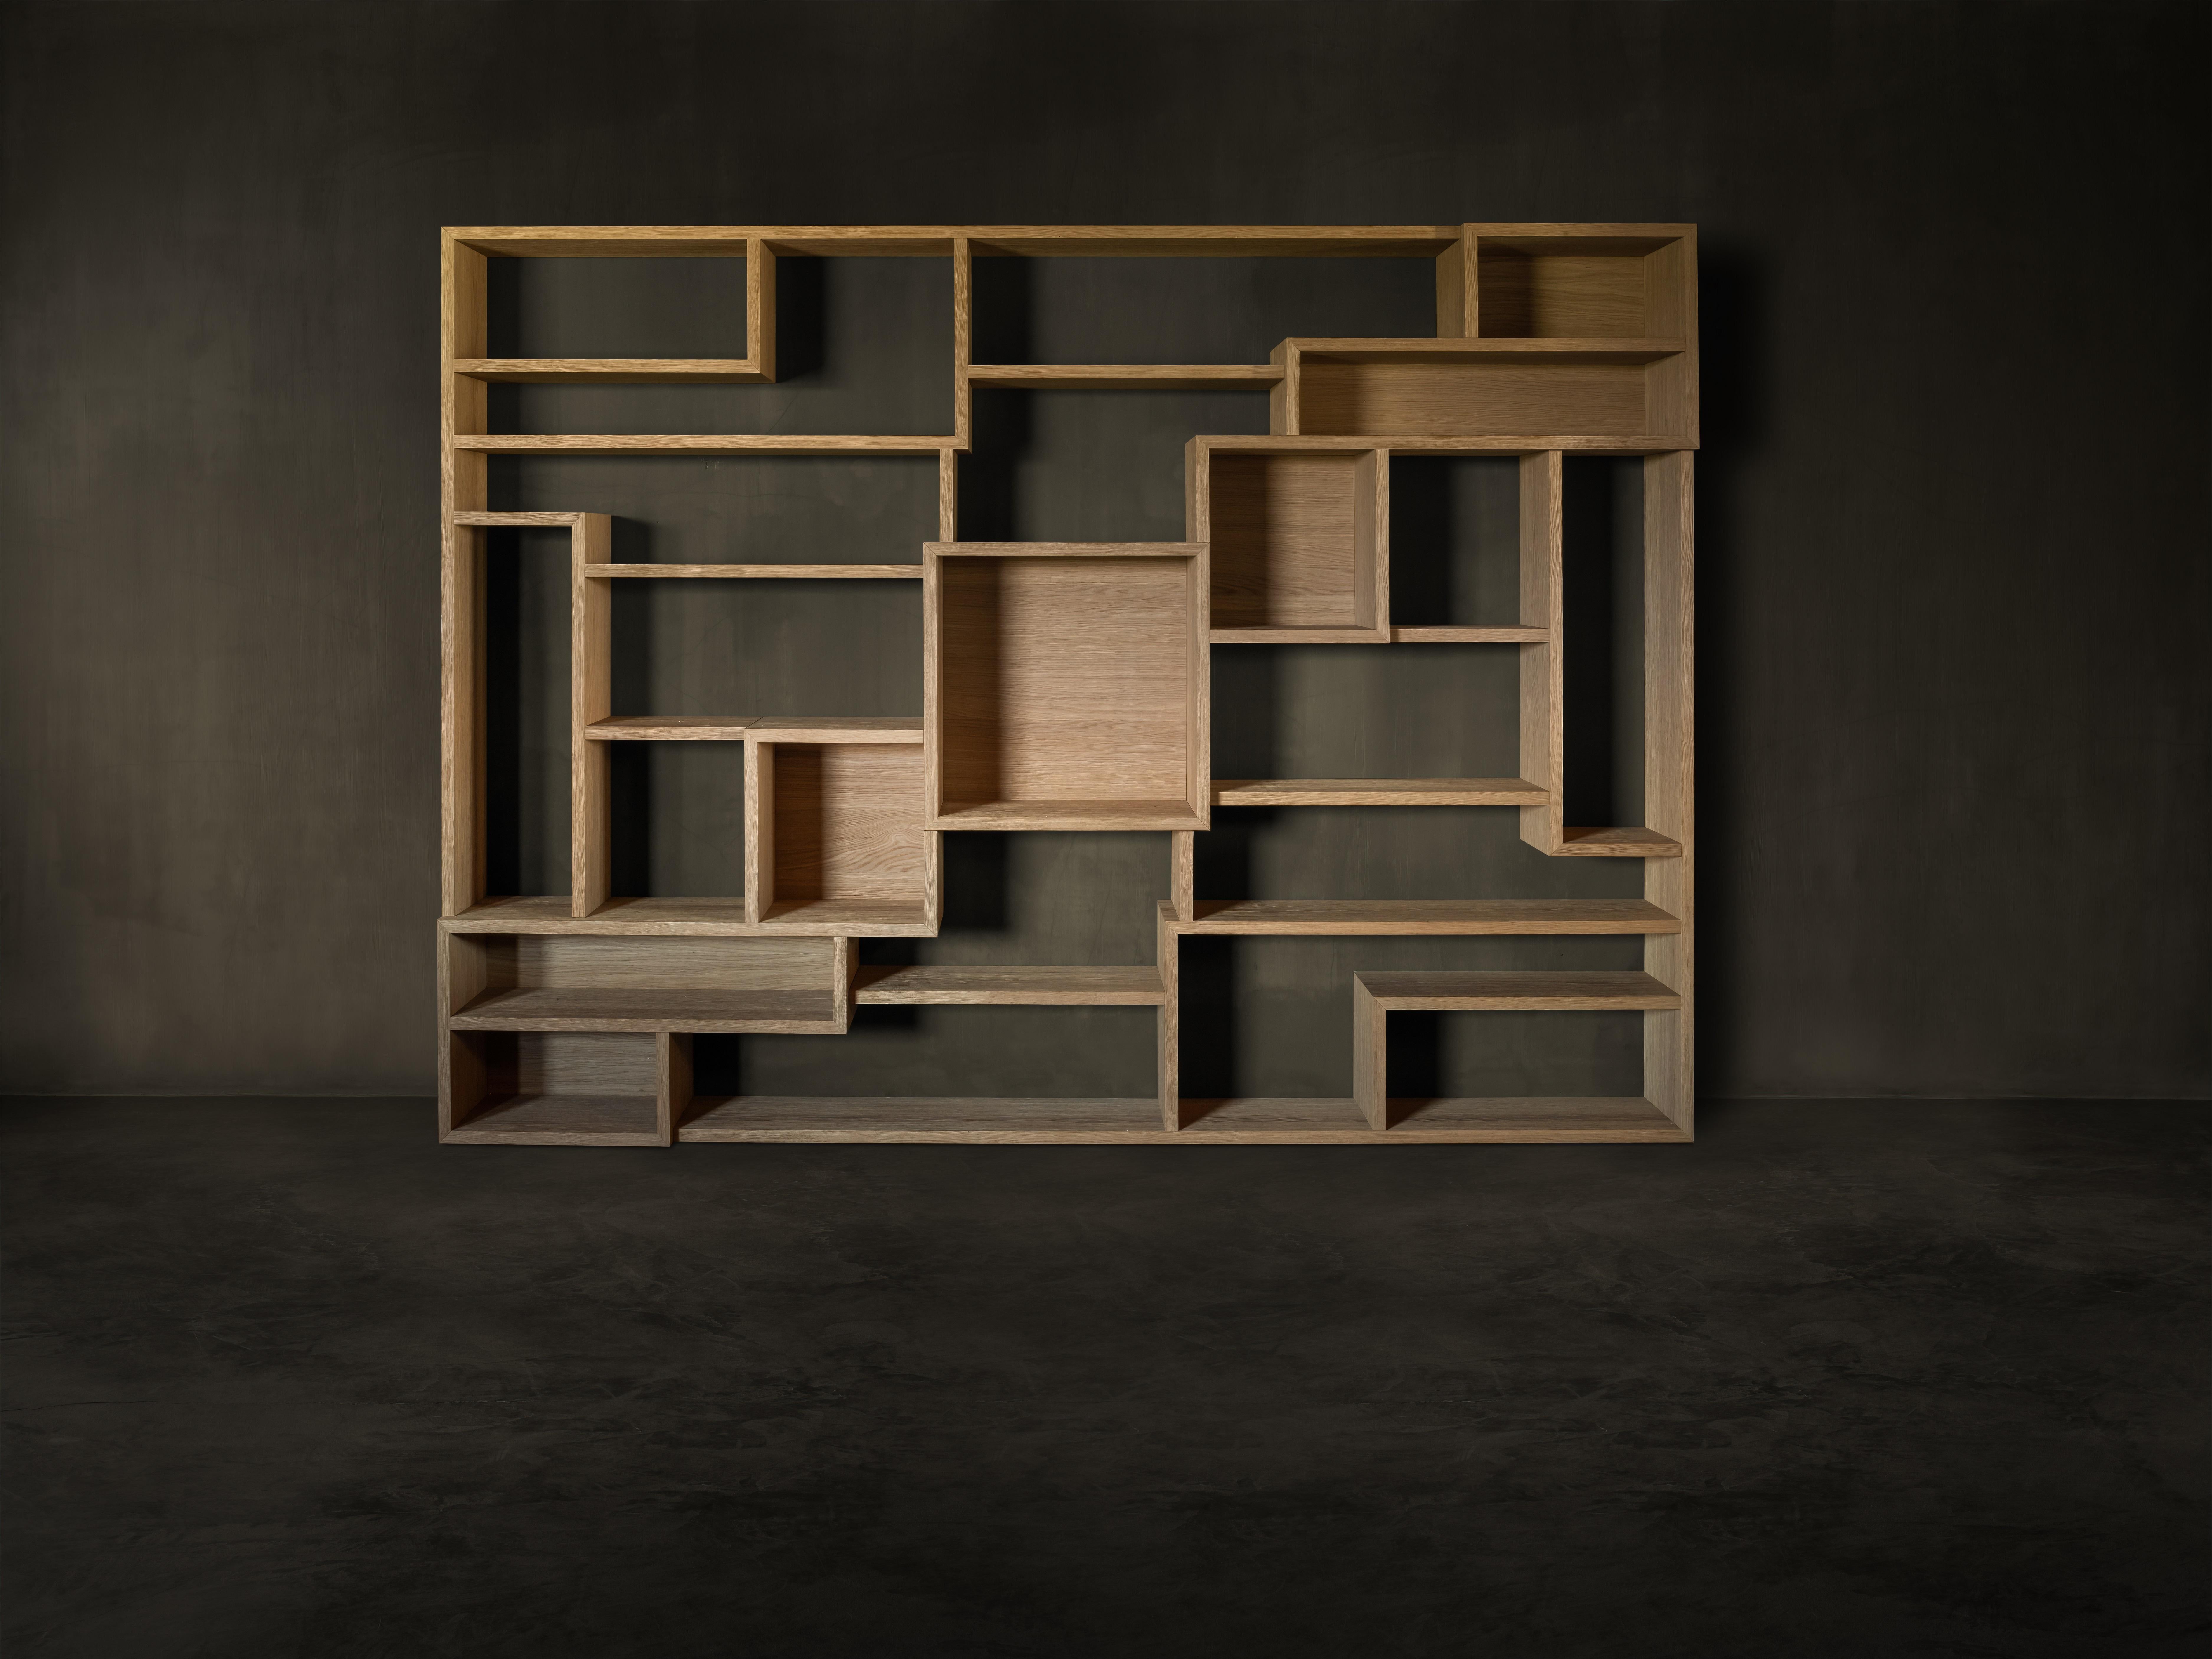 Labyrinth wall bookshelf by Kana Objects.
Dimensions: D 40 x W 291 x H 211 cm.
Materials: natural oak.
Also available in smoked oak.
Other modules available.

Labyrinth is a graphic sculpture for both storing the books and objects you cherish